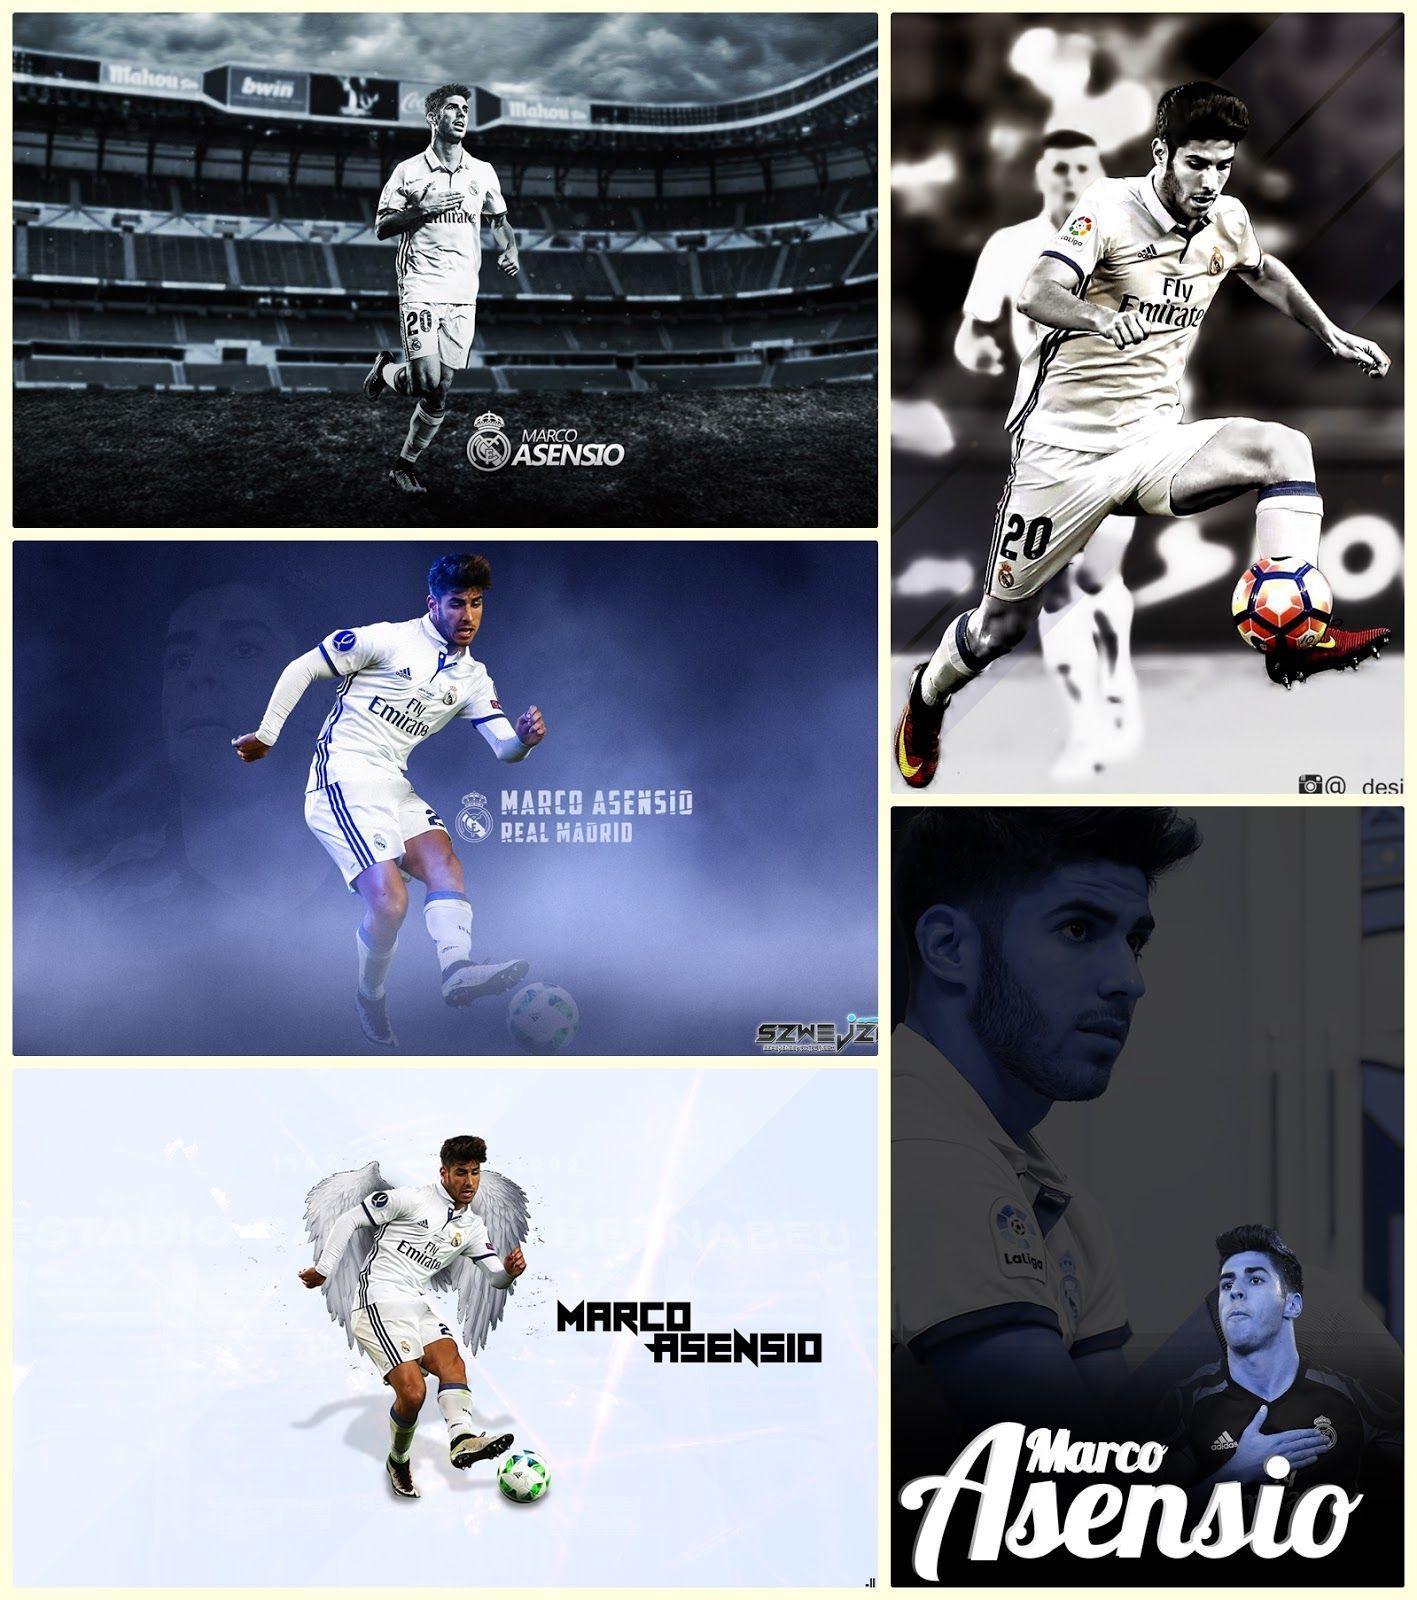 Marco Asensio Wallpaper for iPhone, Android, Desktop, Windows, Mac